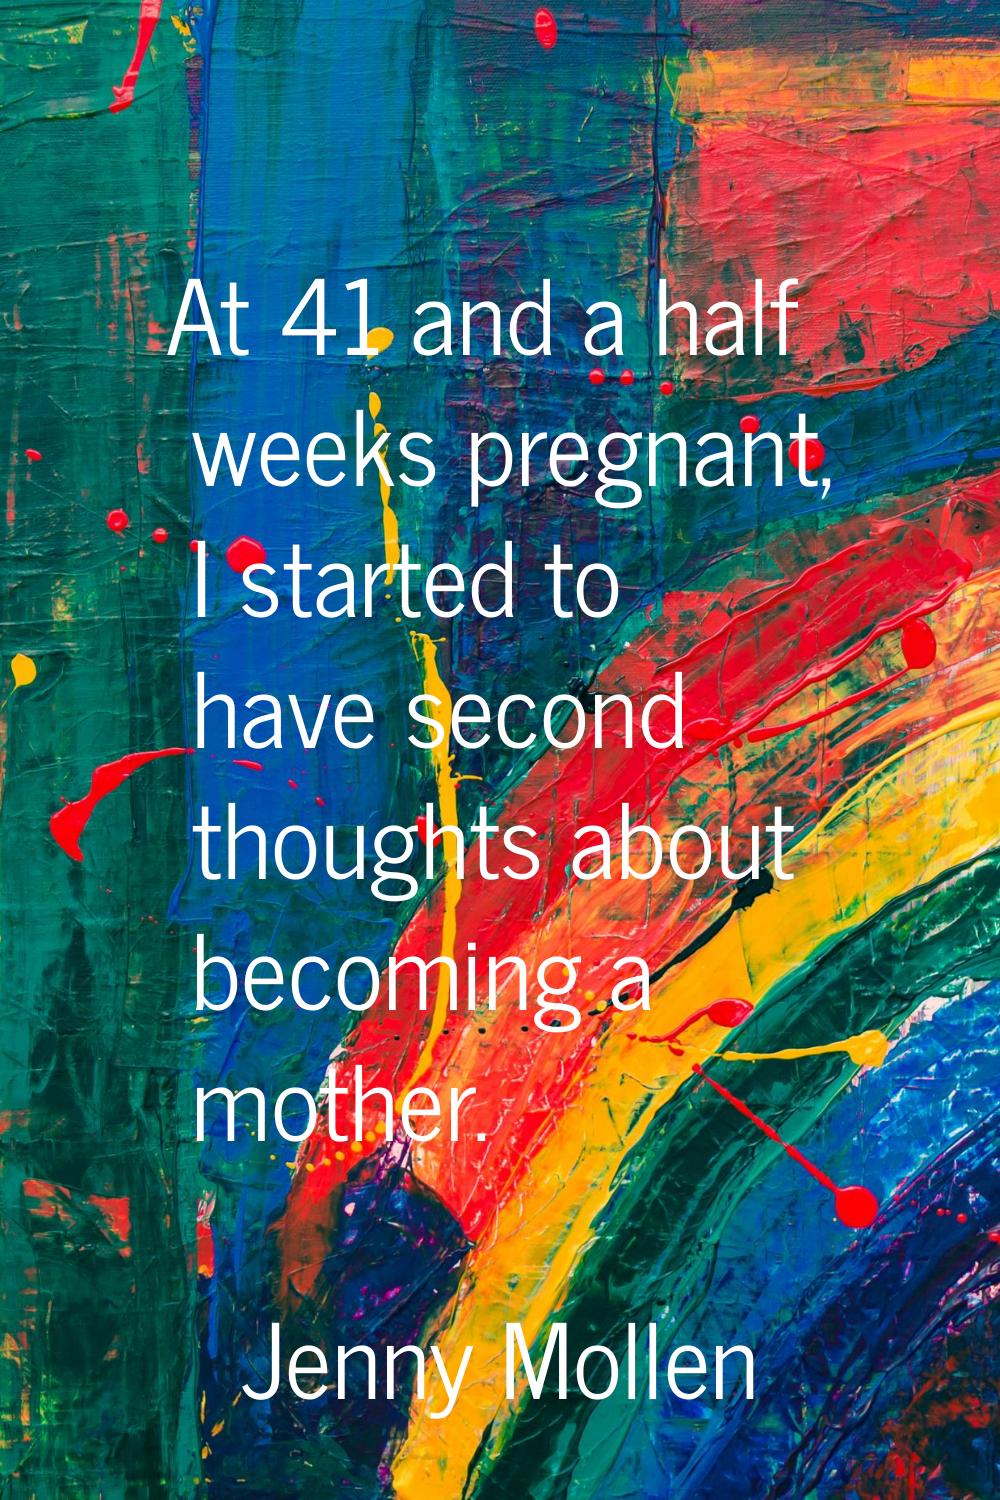 At 41 and a half weeks pregnant, I started to have second thoughts about becoming a mother.